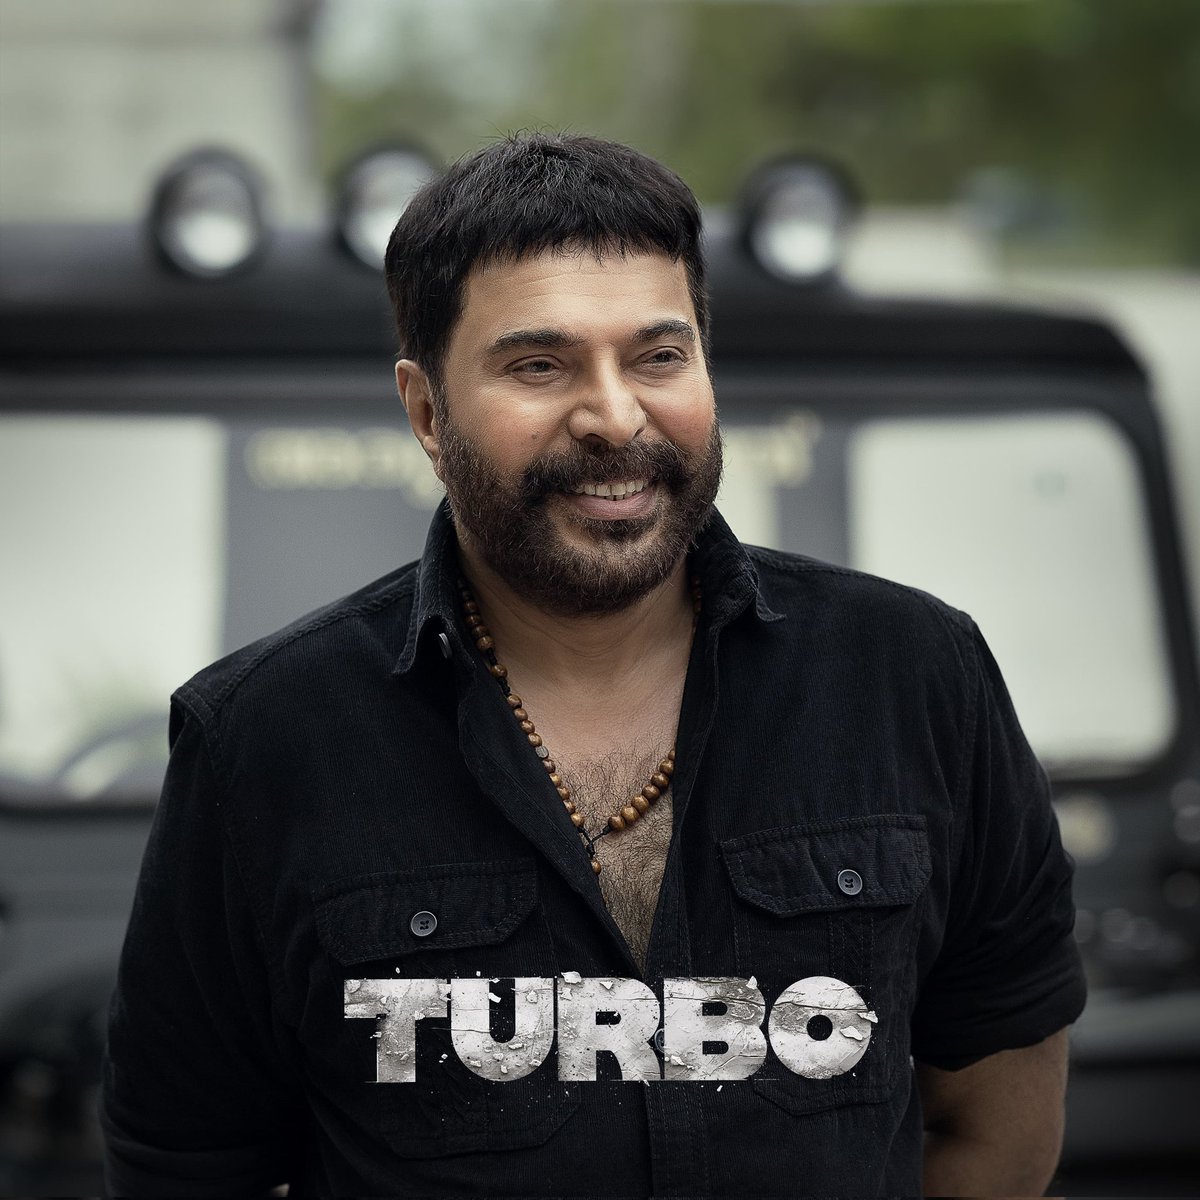 Who all are Waiting for #Turbo Trailer ??!! 🔥 Official Trailer Releasing Tomorrow at 9 PM IST #Mammootty #MammoottyKampany #TurboMovie @mammukka @TurboTheFilm